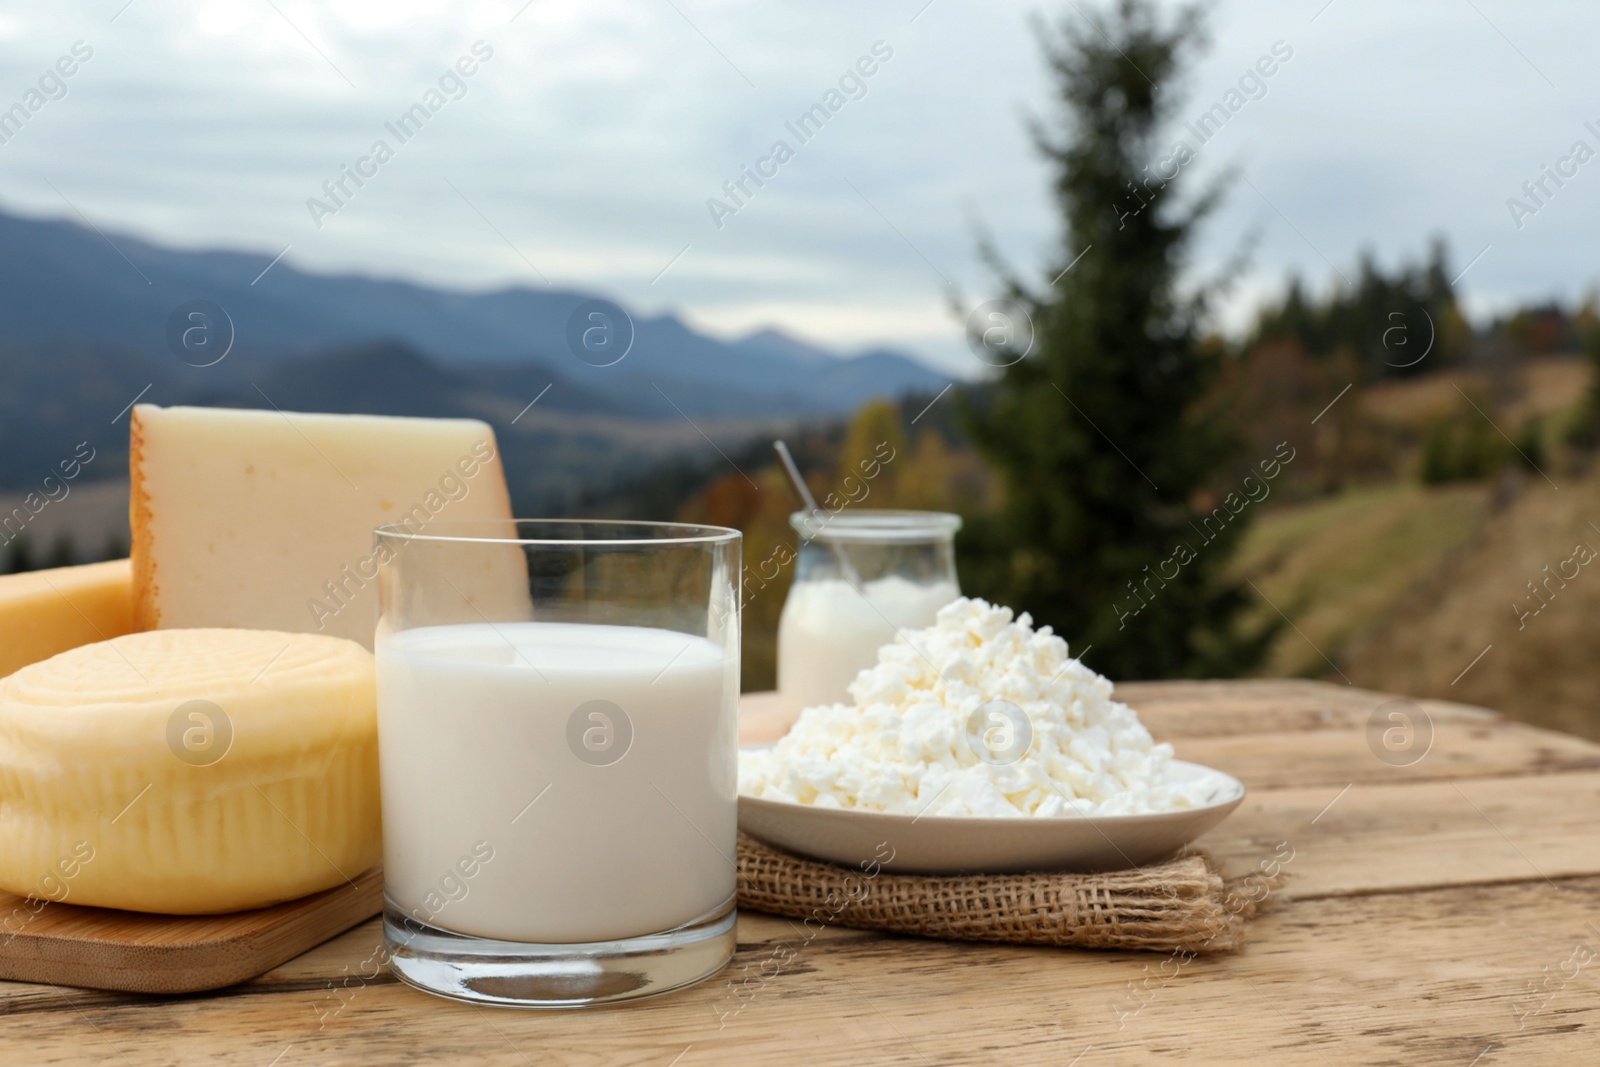 Photo of Tasty cottage cheese and other fresh dairy products on wooden table in mountains